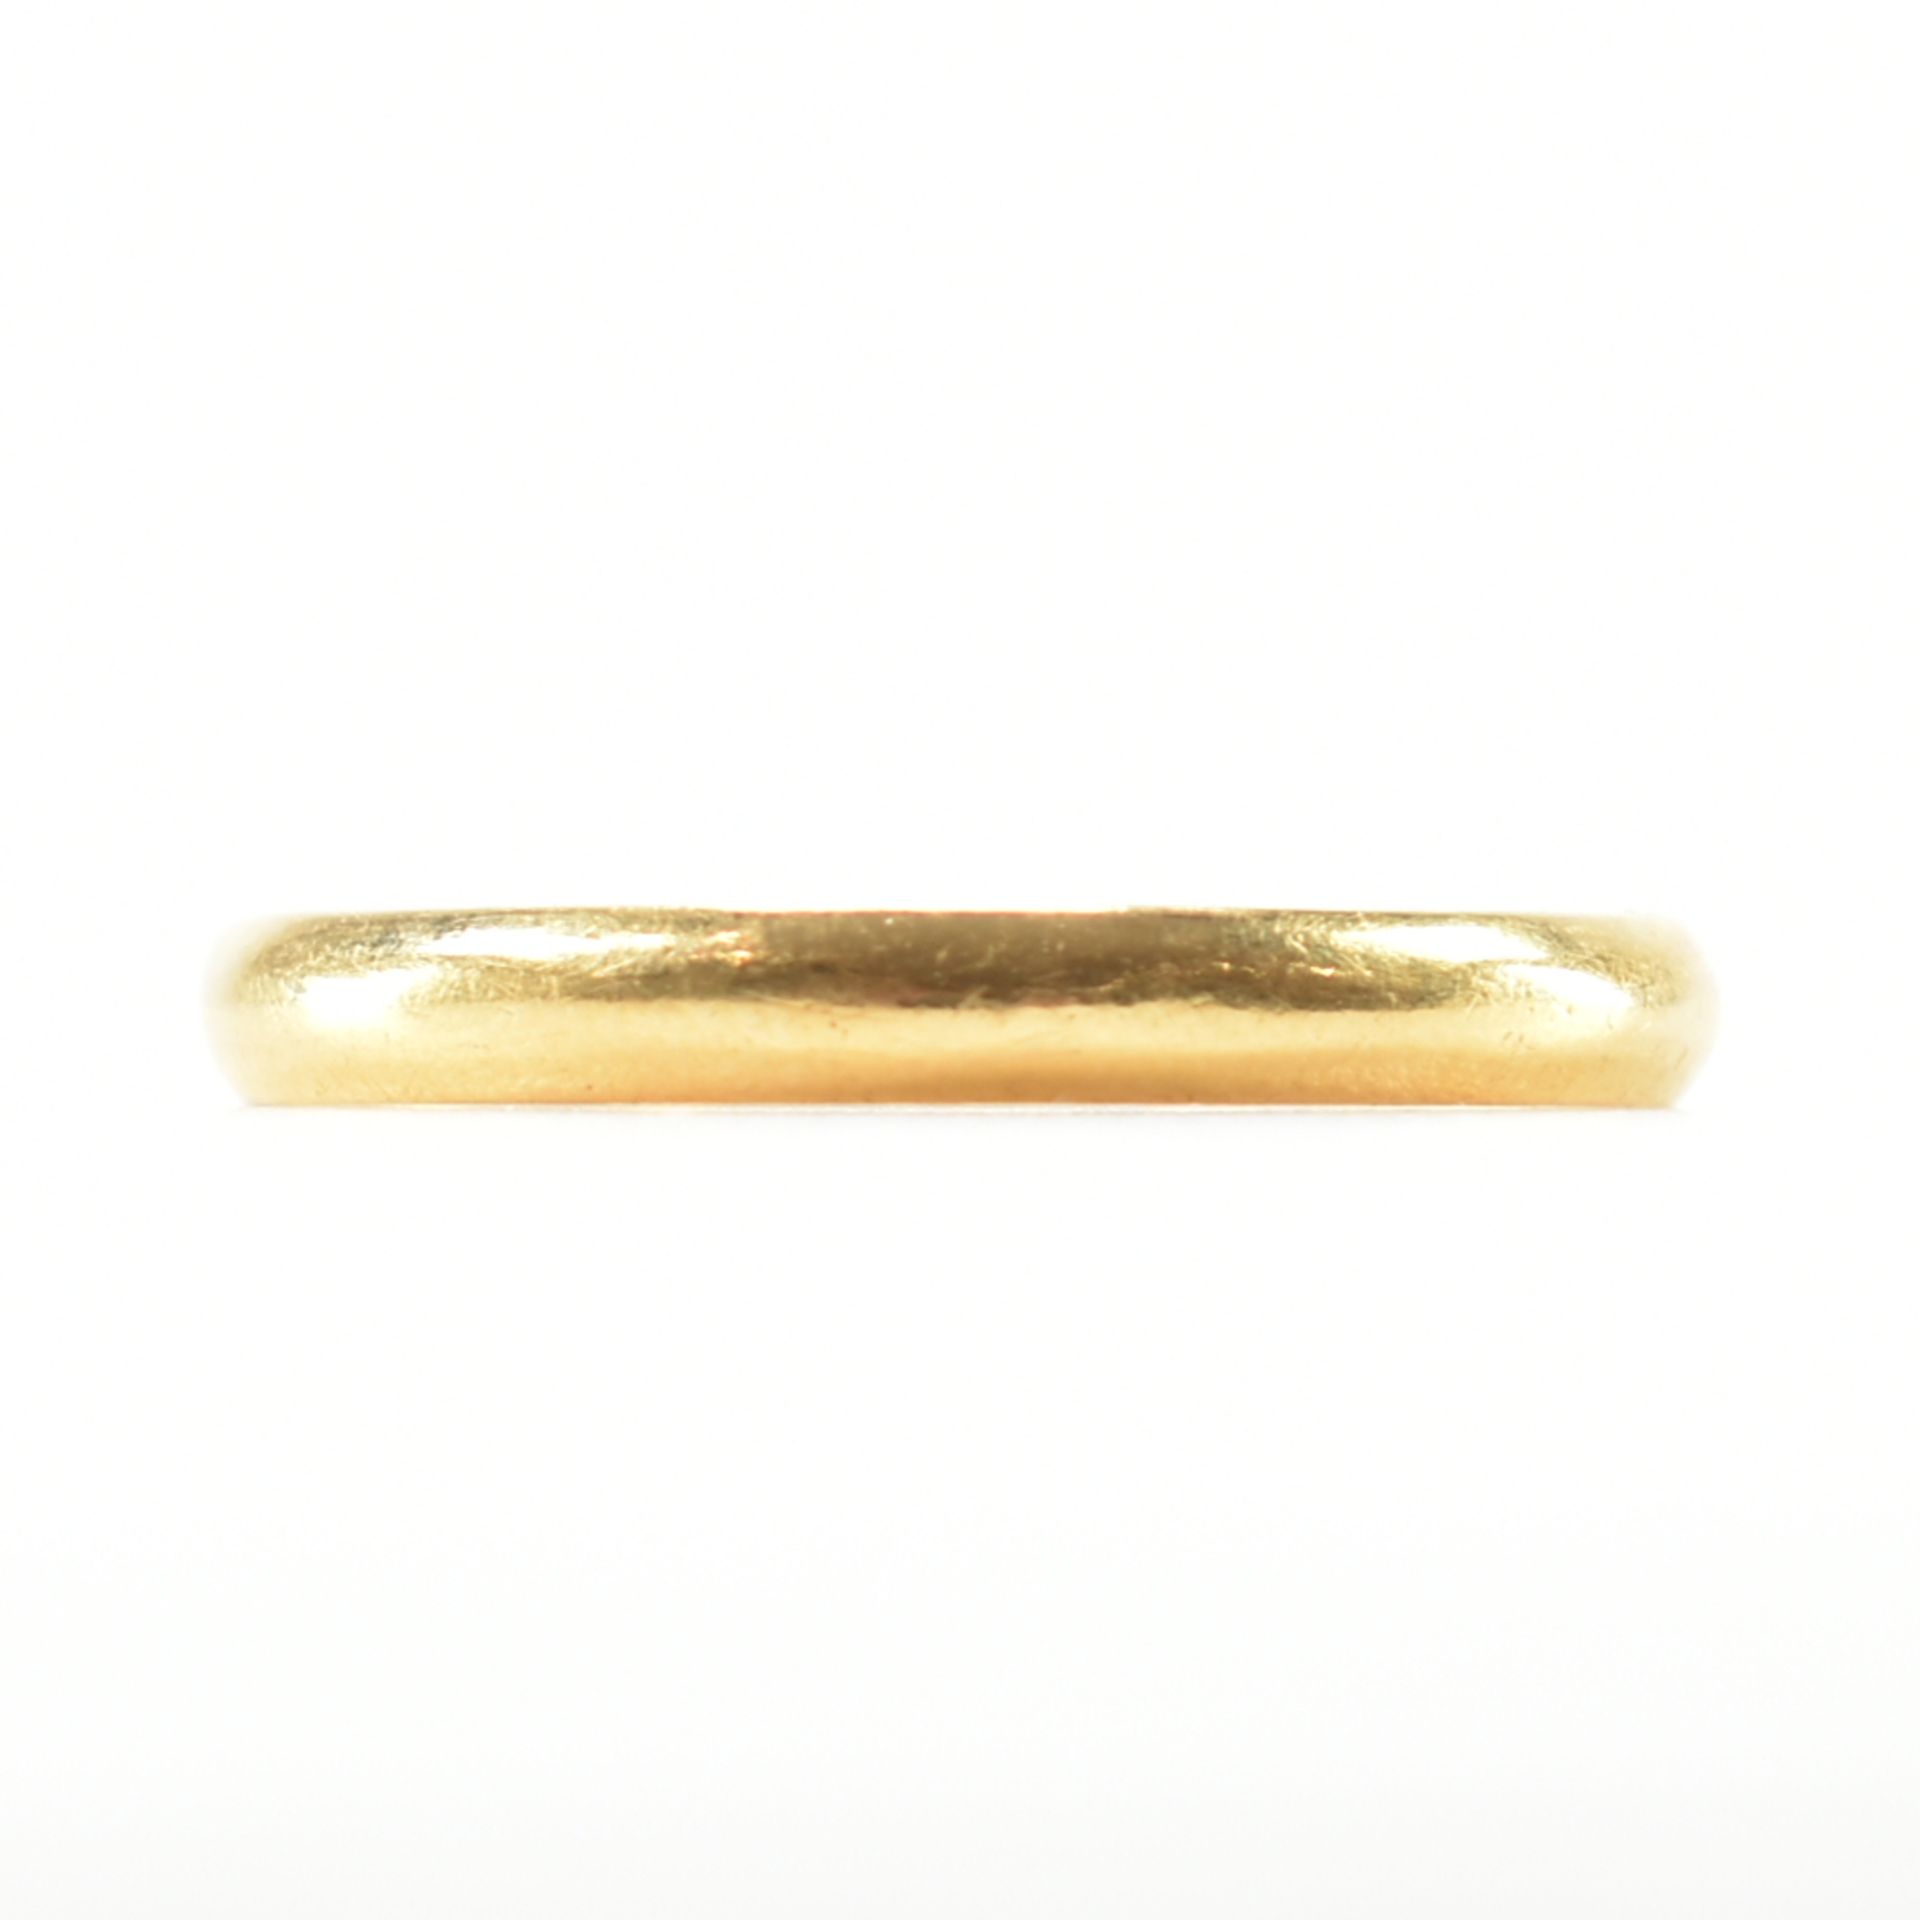 HALLMARKED 22CT GOLD BAND RING - Image 2 of 6